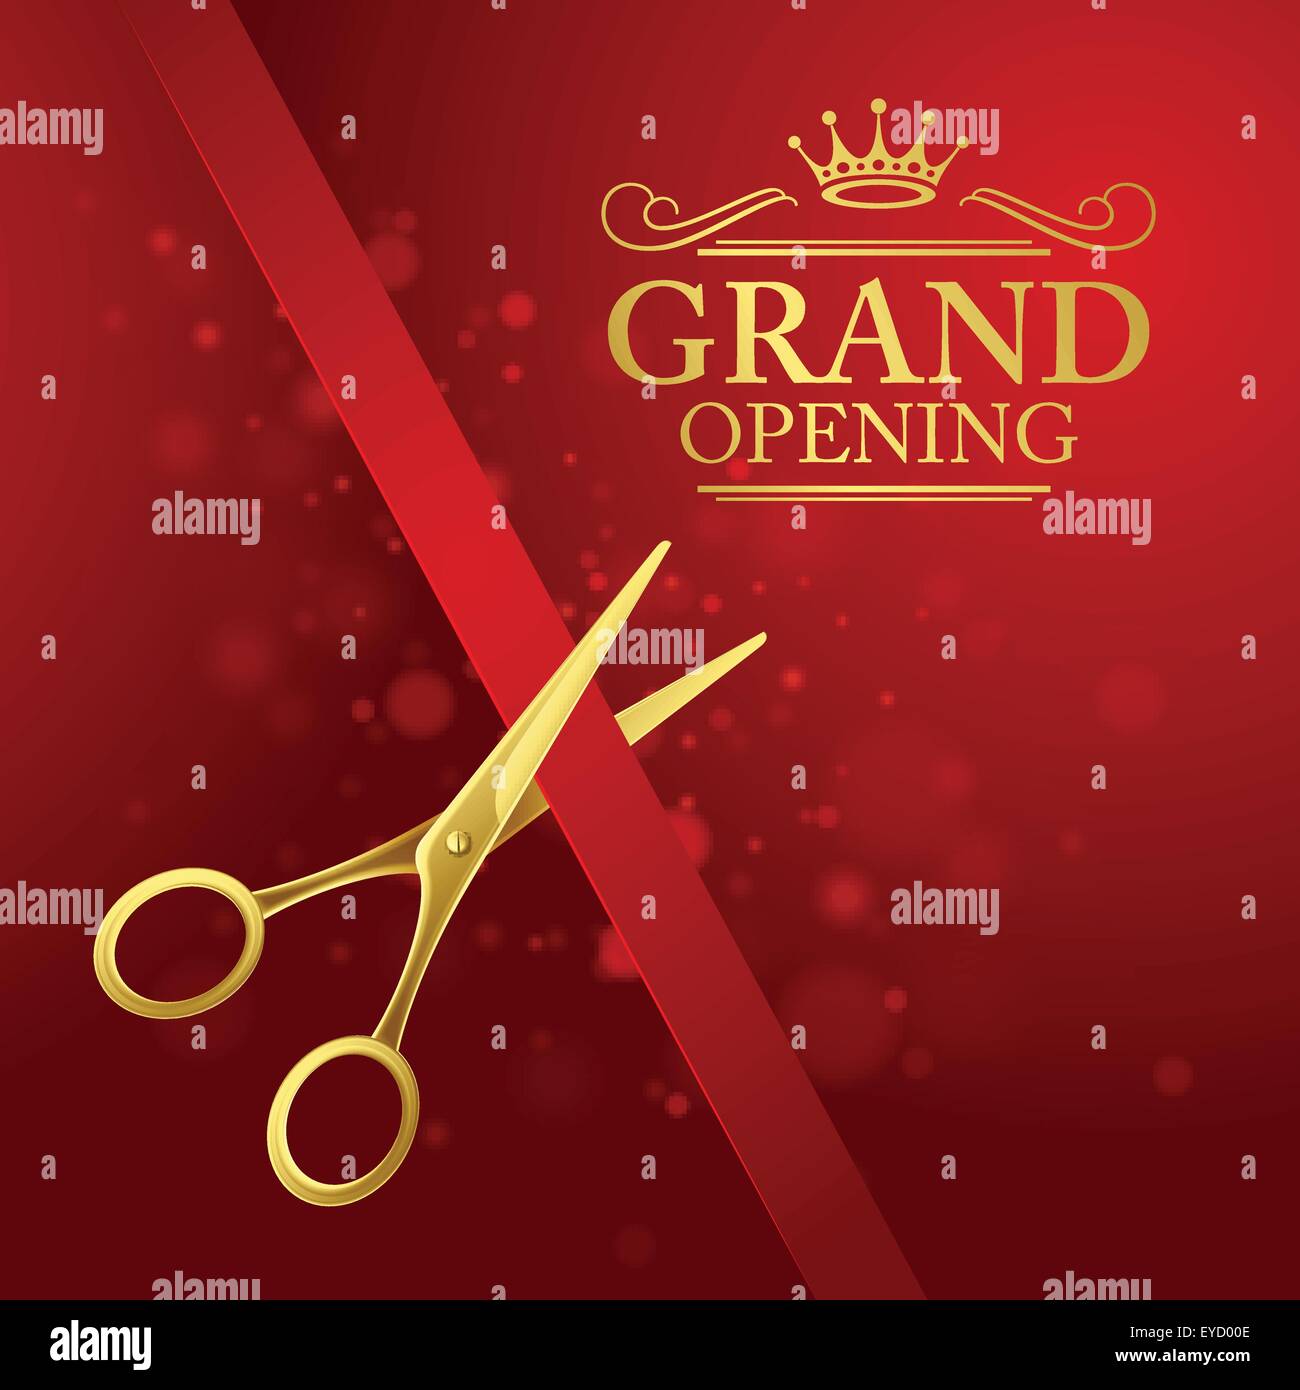 Red Printed Grand Opening Ribbon